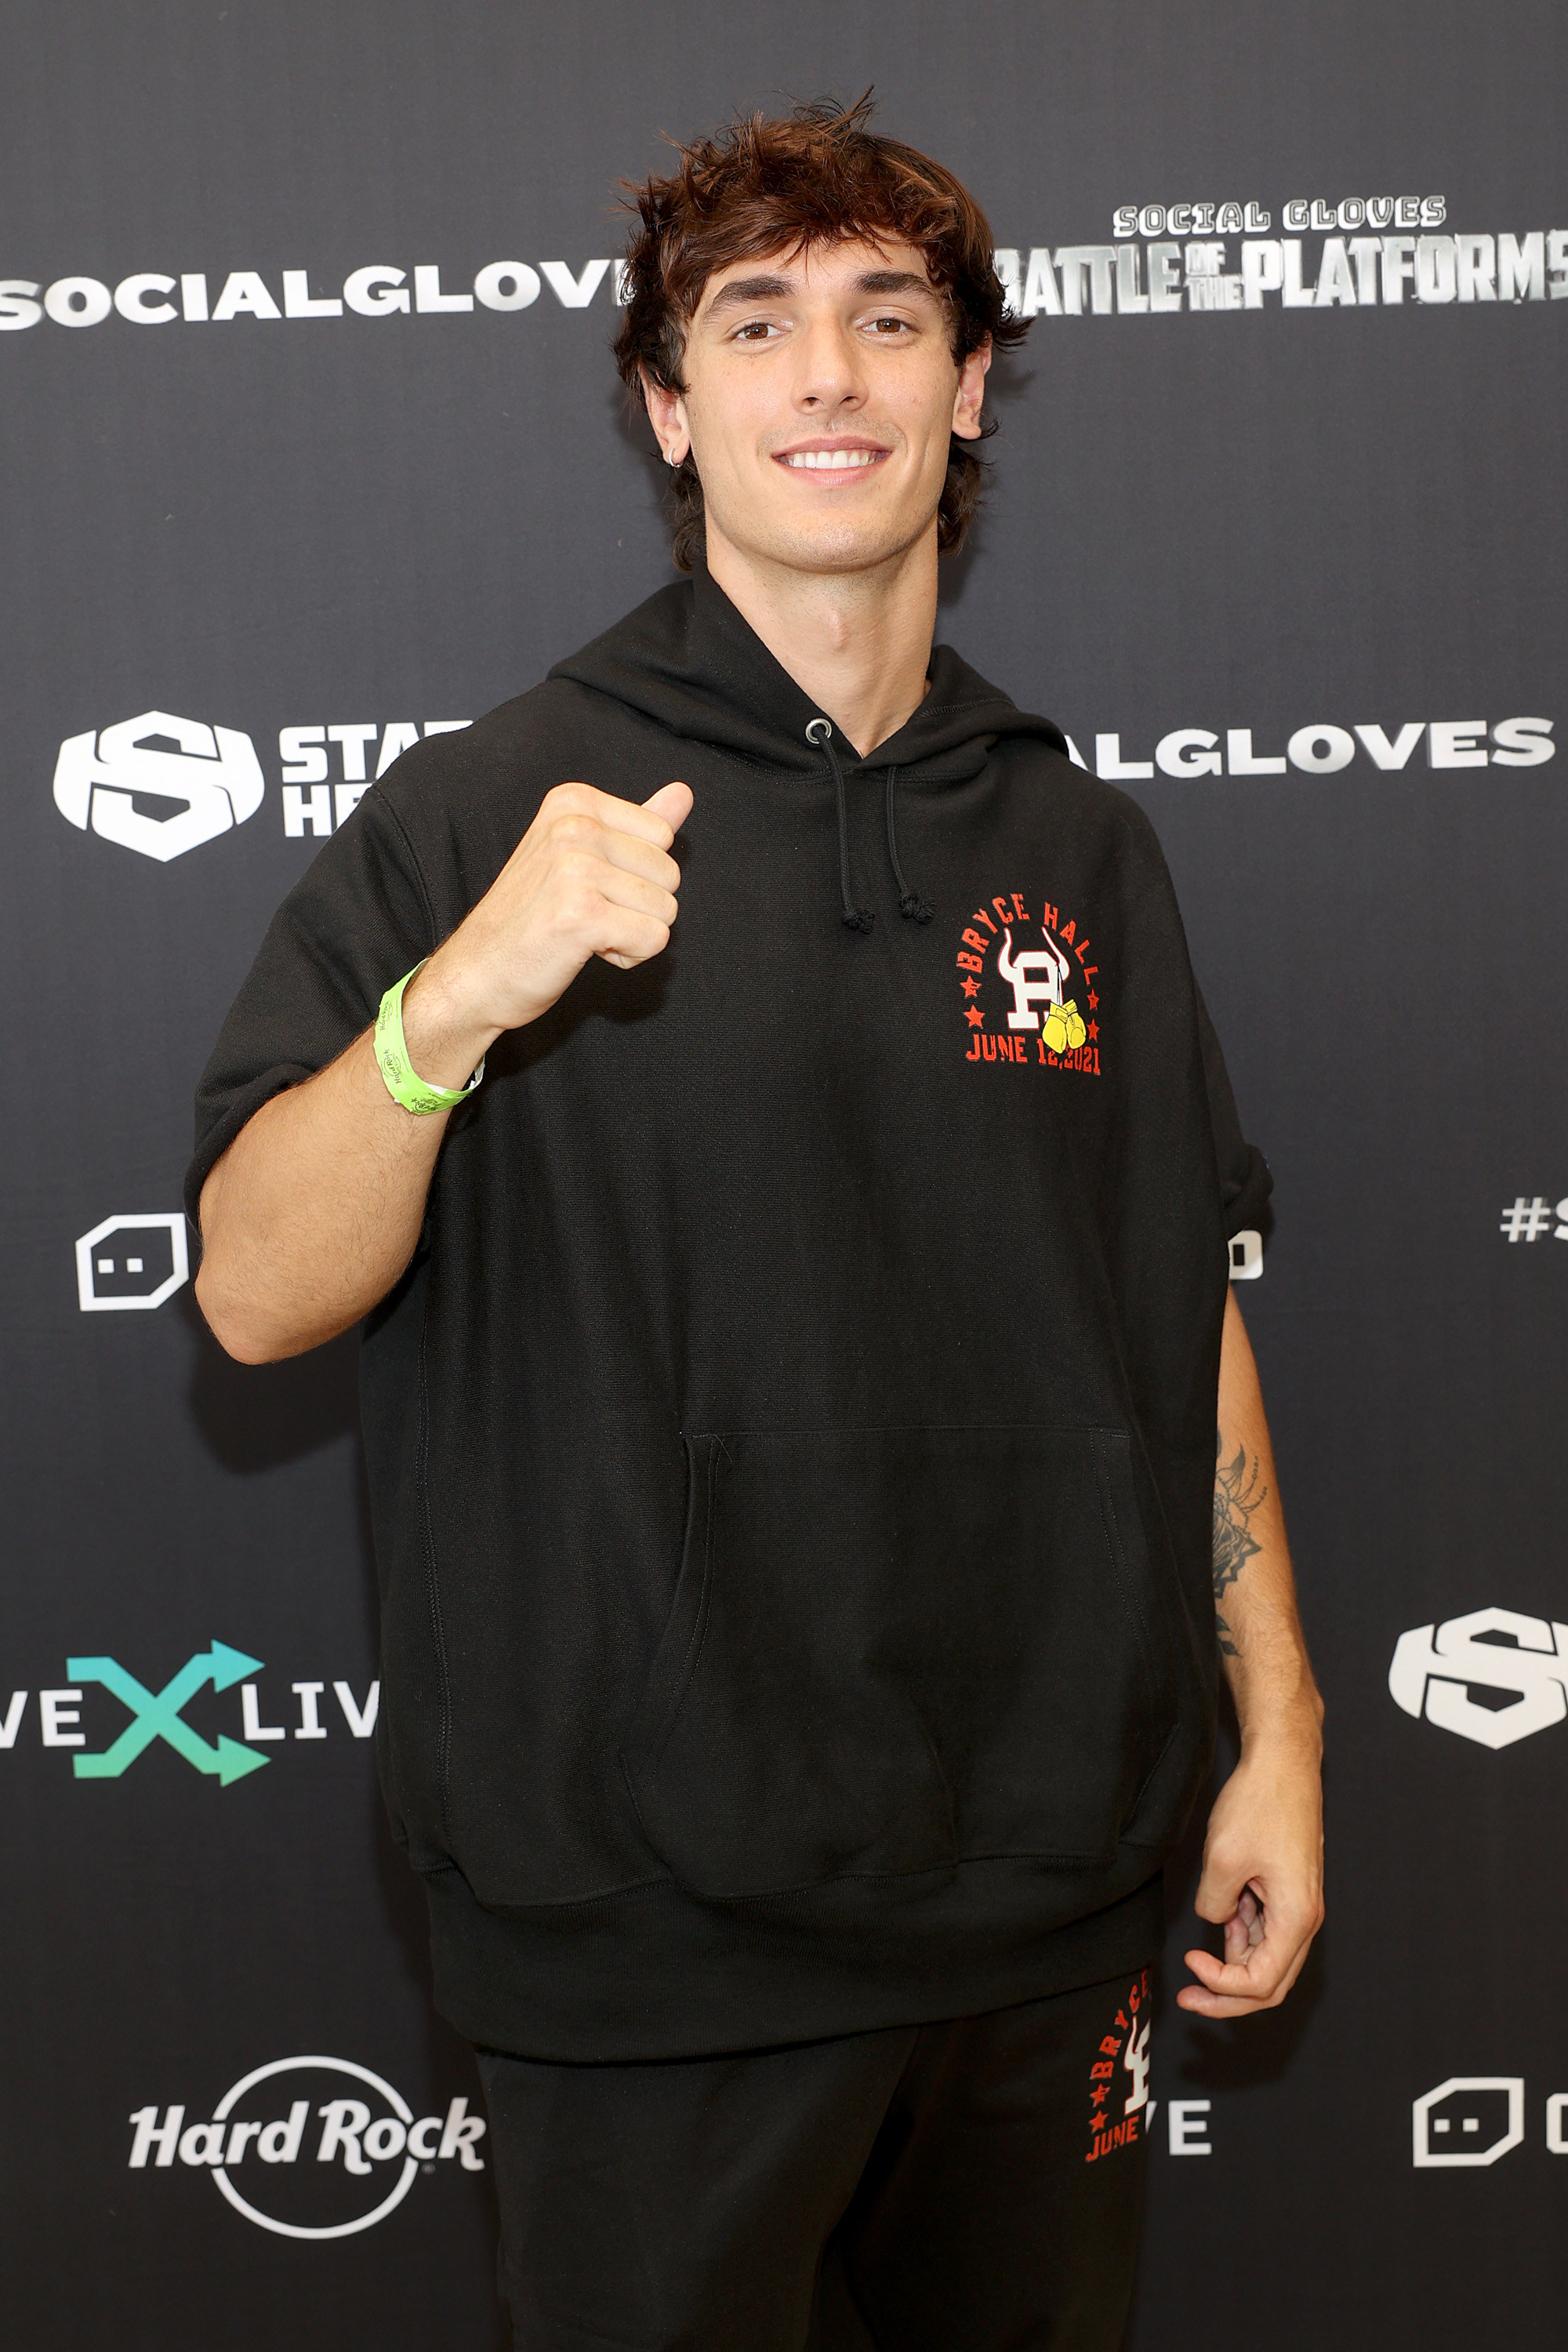 Bryce Hall at the LiveXLive&#x27;s Social Gloves: Battle Of The Platforms Pre-Fight Weigh-In @ Hard Rock Live! event on June 11, 2021